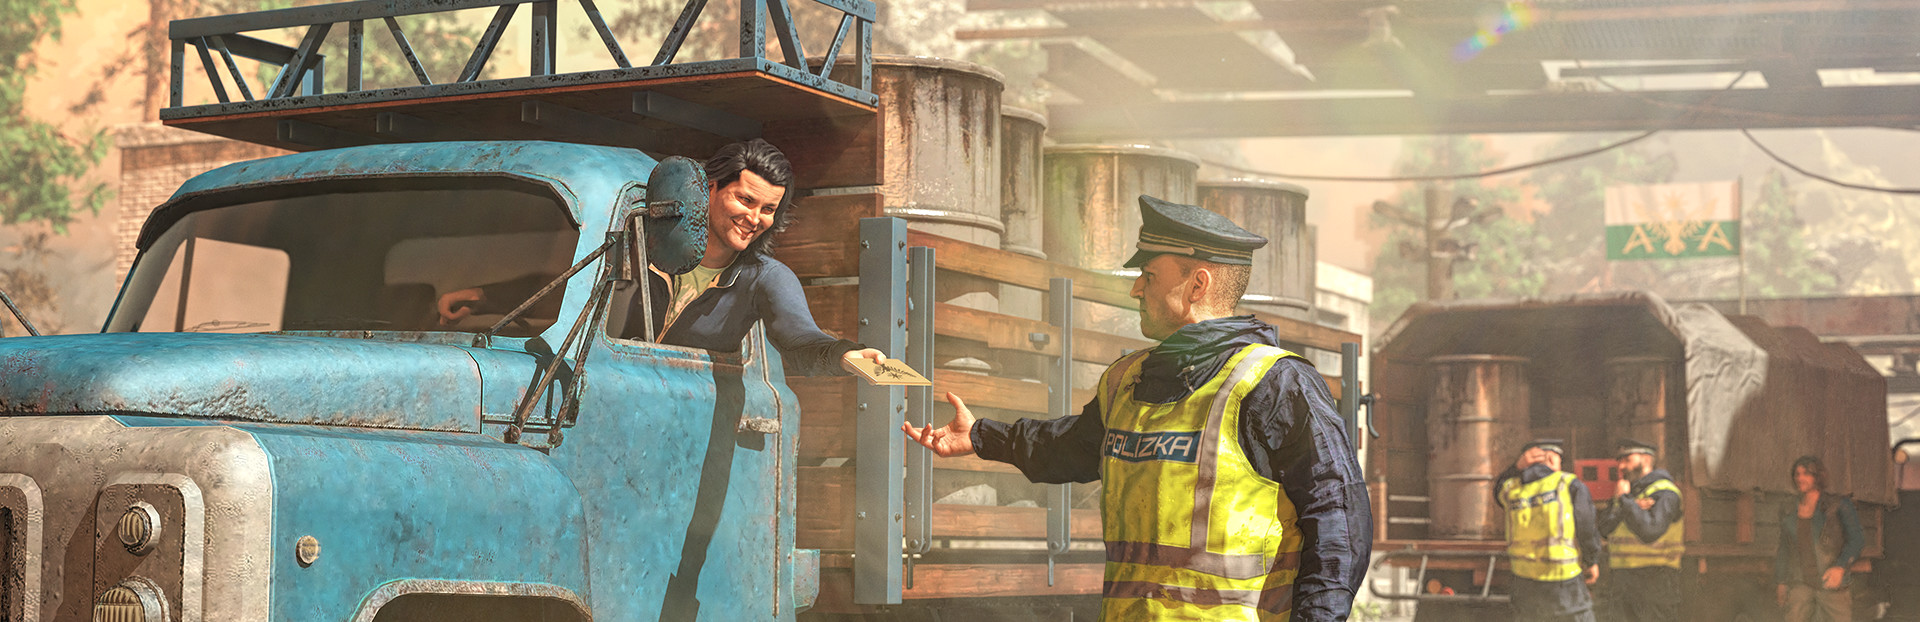 contraband police demo free download